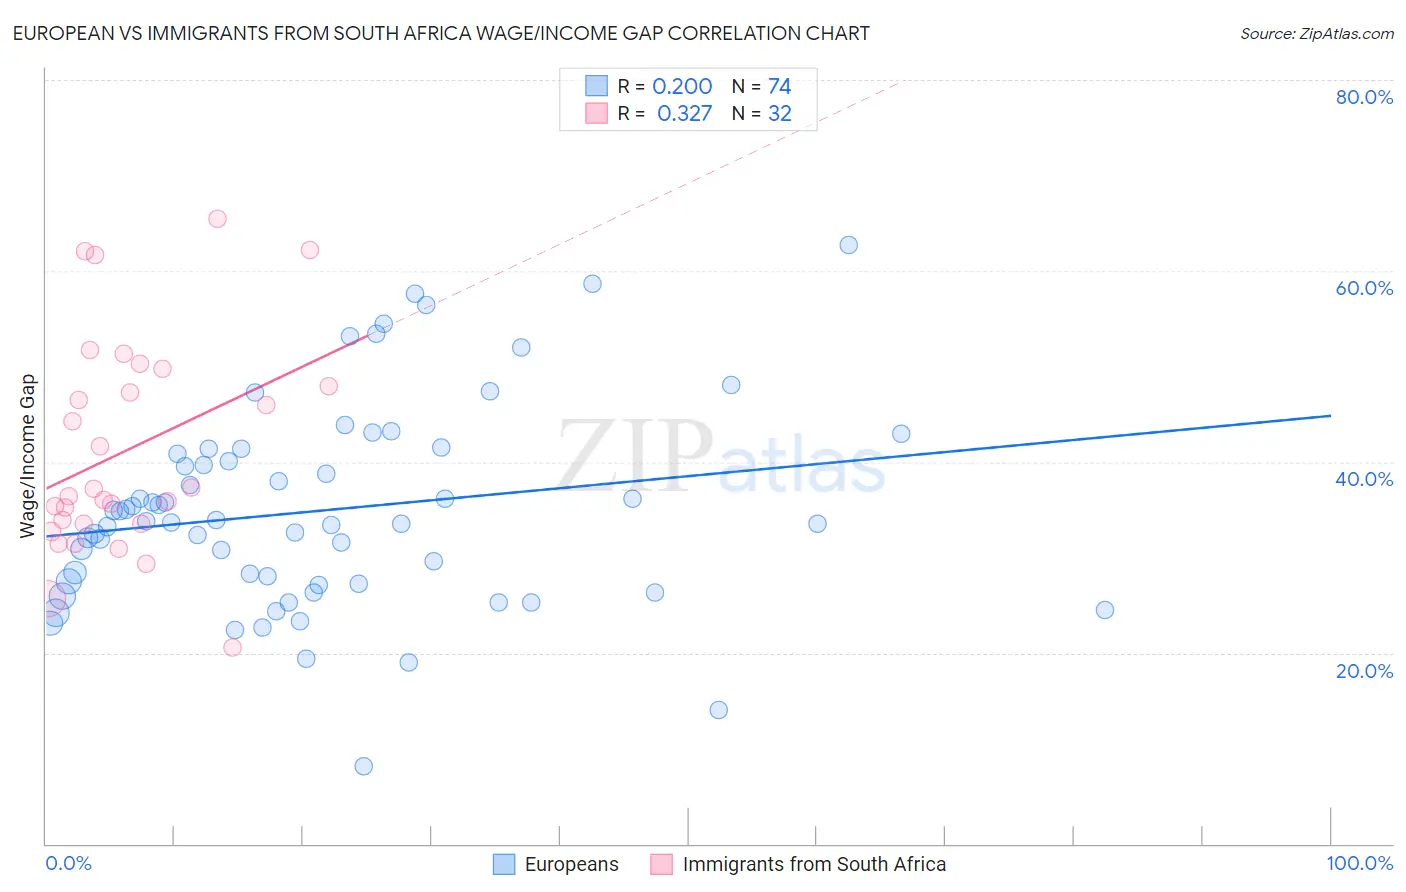 European vs Immigrants from South Africa Wage/Income Gap